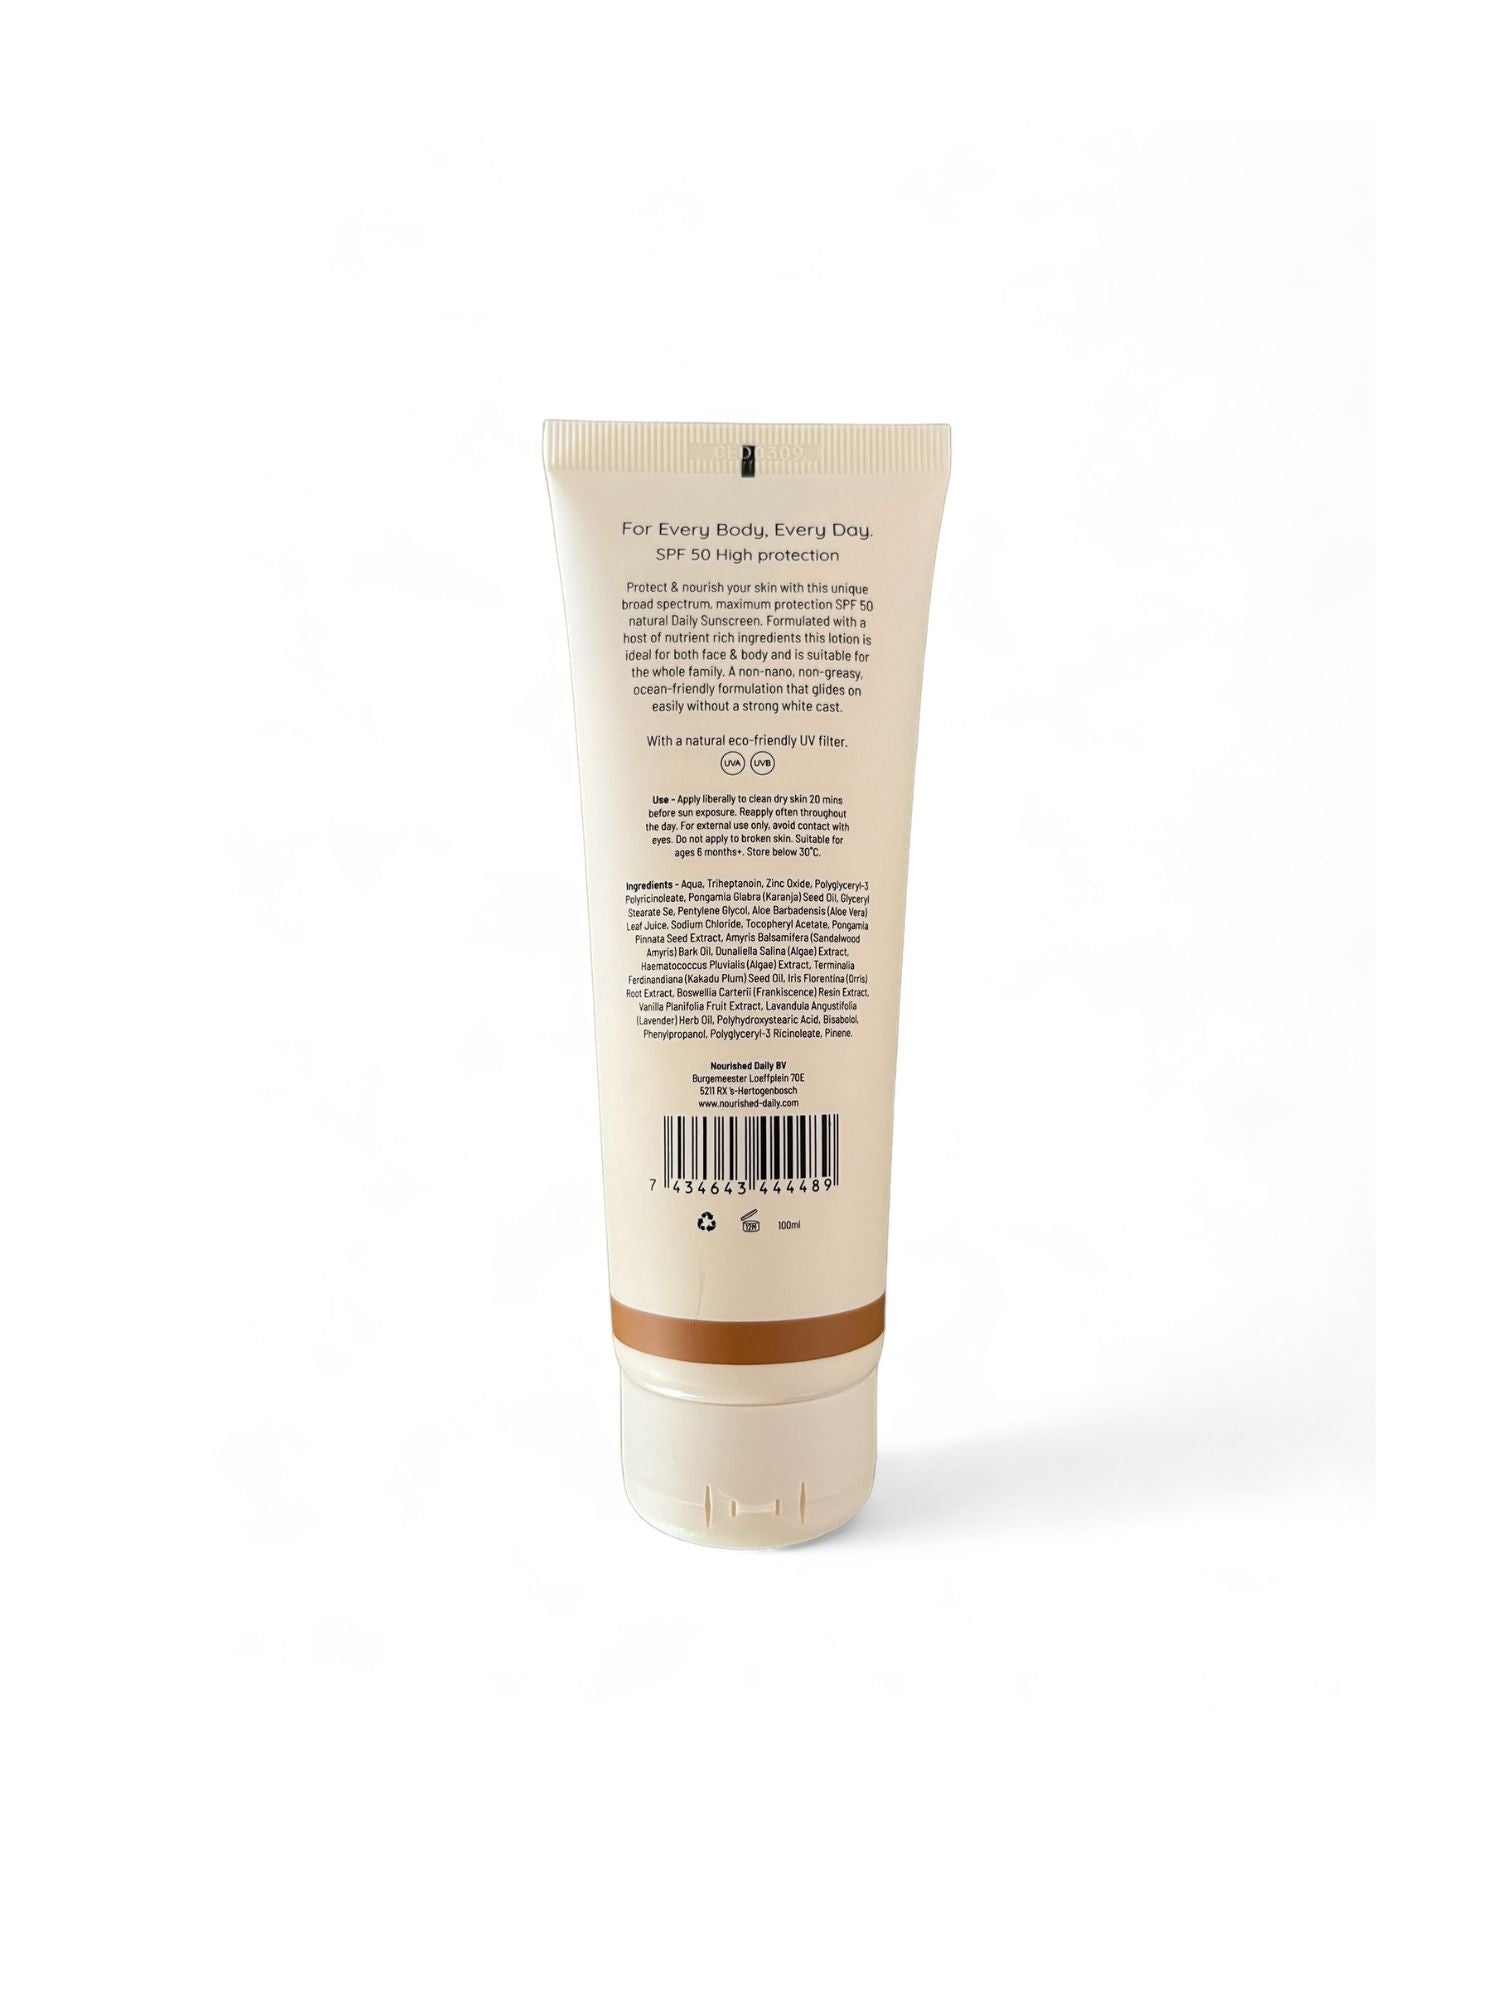 Natural Daily Susncreen Lotion SPF50, Daily Sunscreen, Sunscreen SPF50, Nourished Daily.